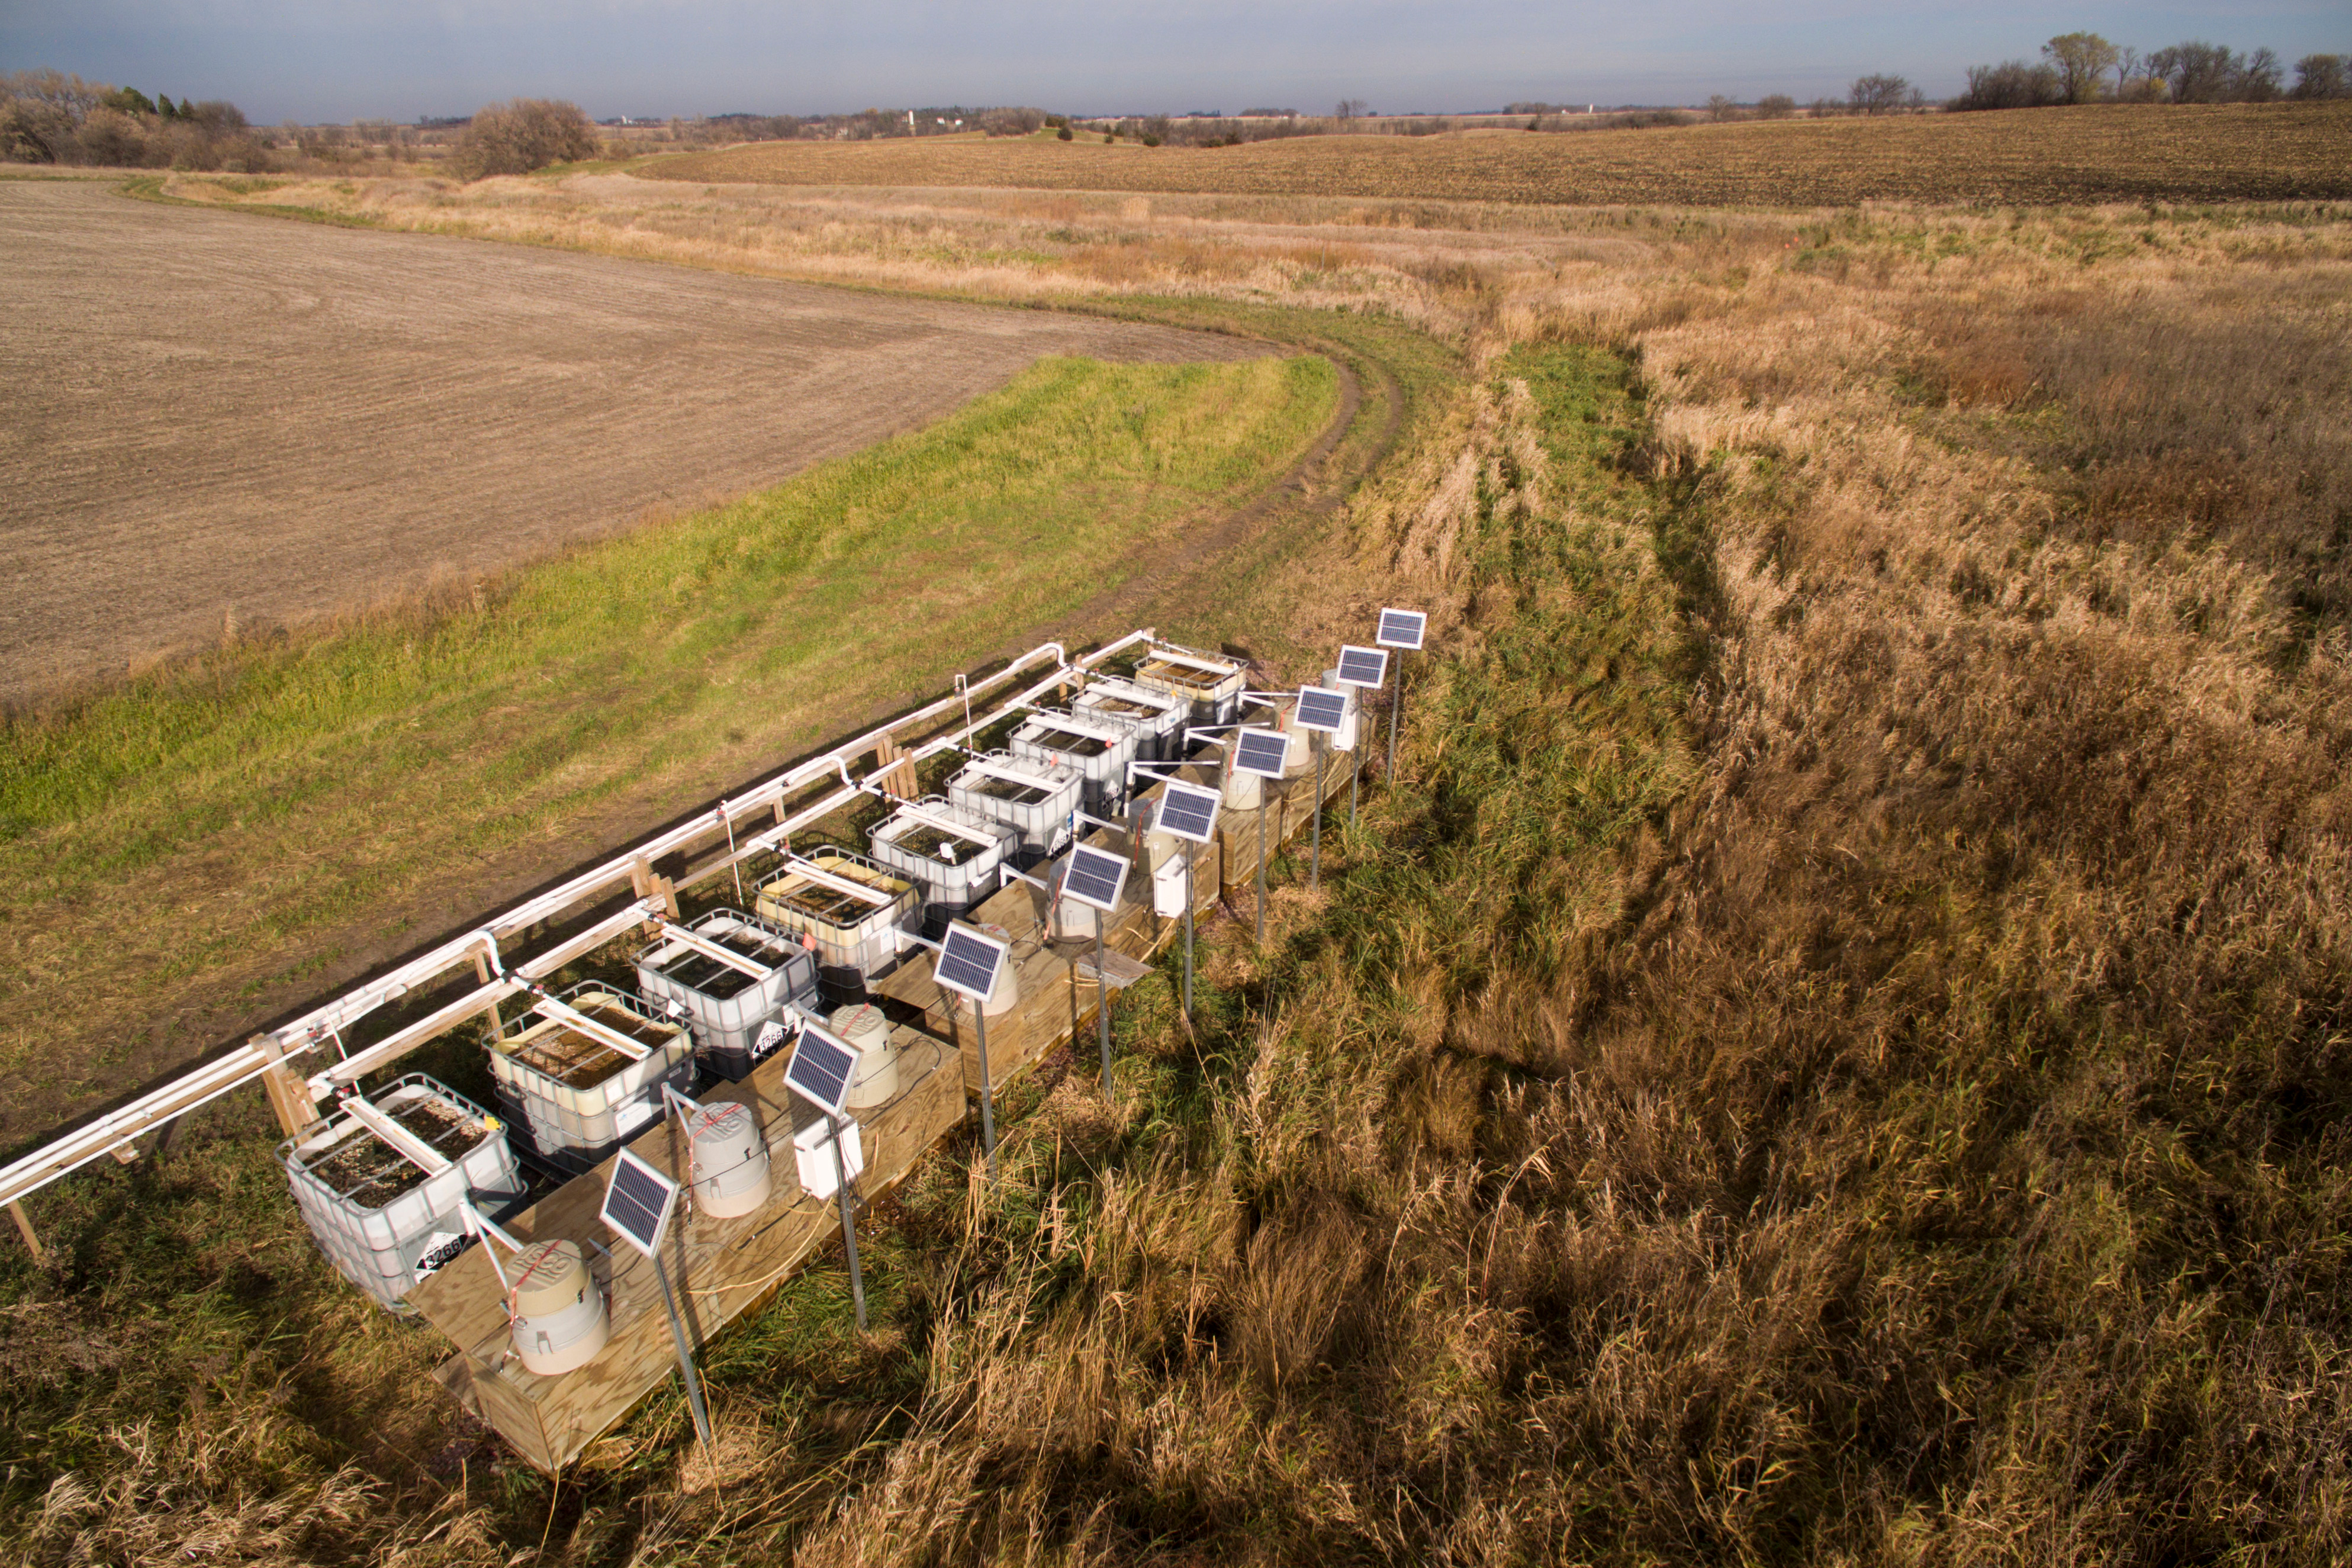 Aerial view of modular bioreactor at the edge of a field.